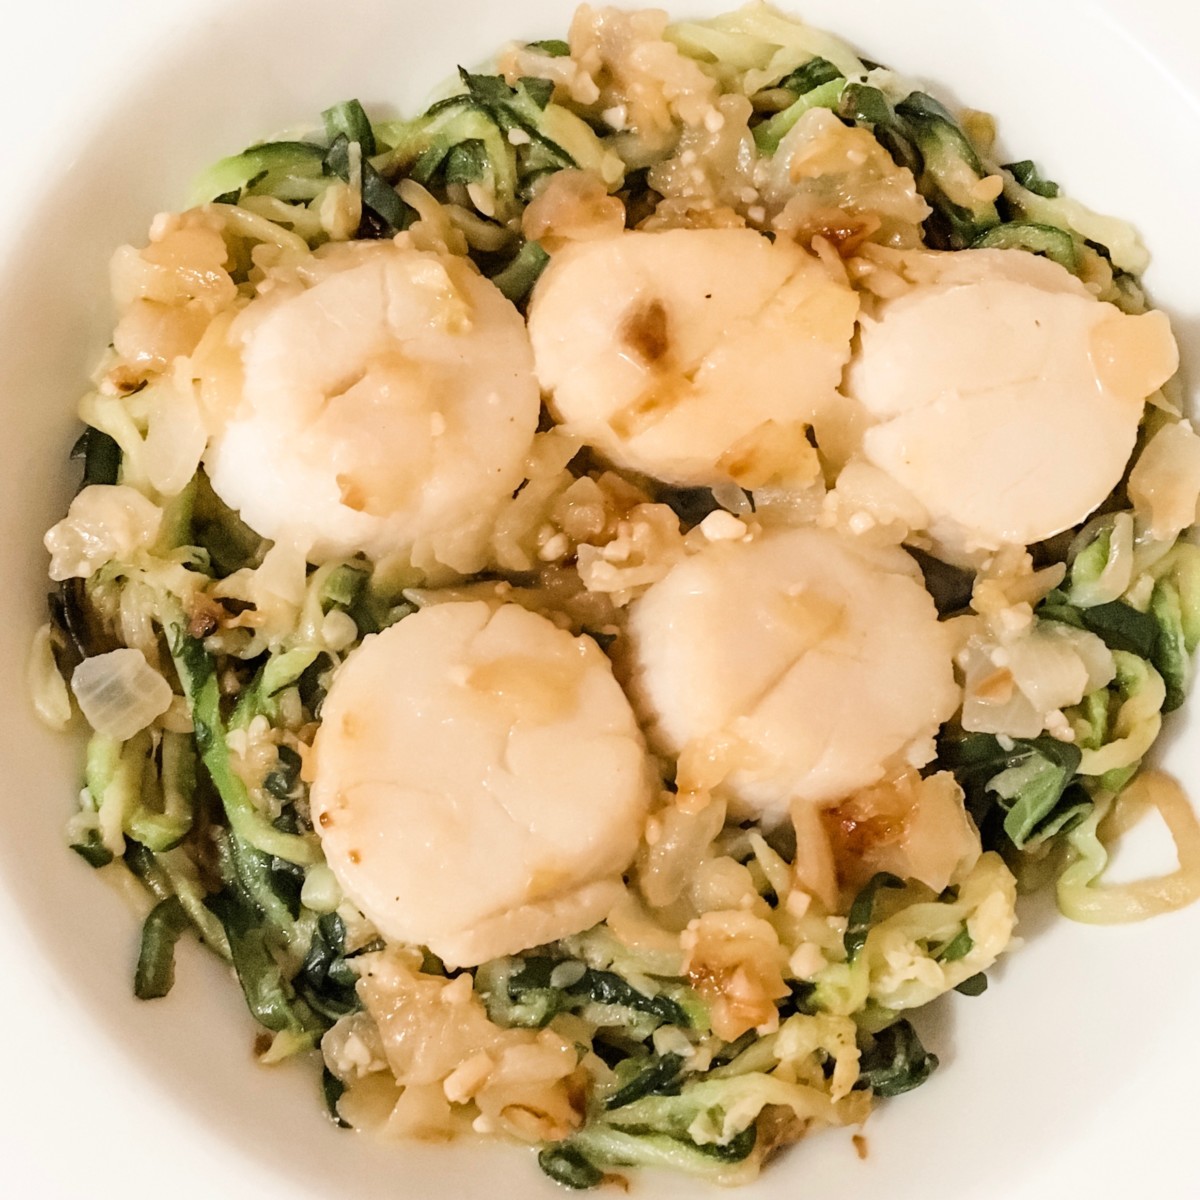 scallops with zoodles - zucchini noodles